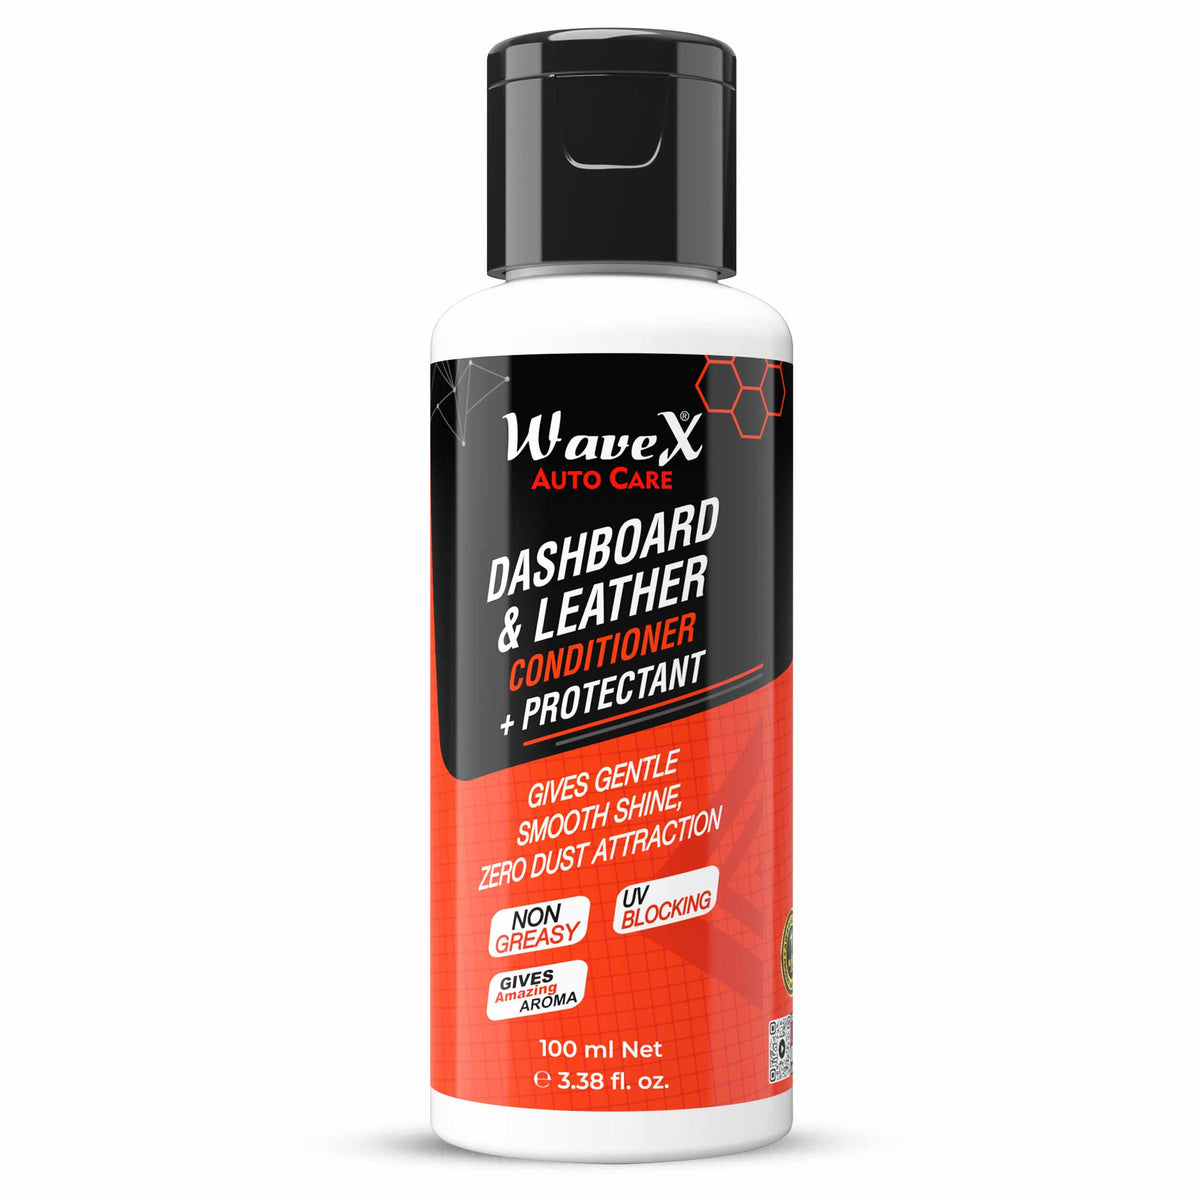 Car Dashboard Polish and Leather Conditioner+Protectant 100ml | Car Interior Cleaner and Shiner